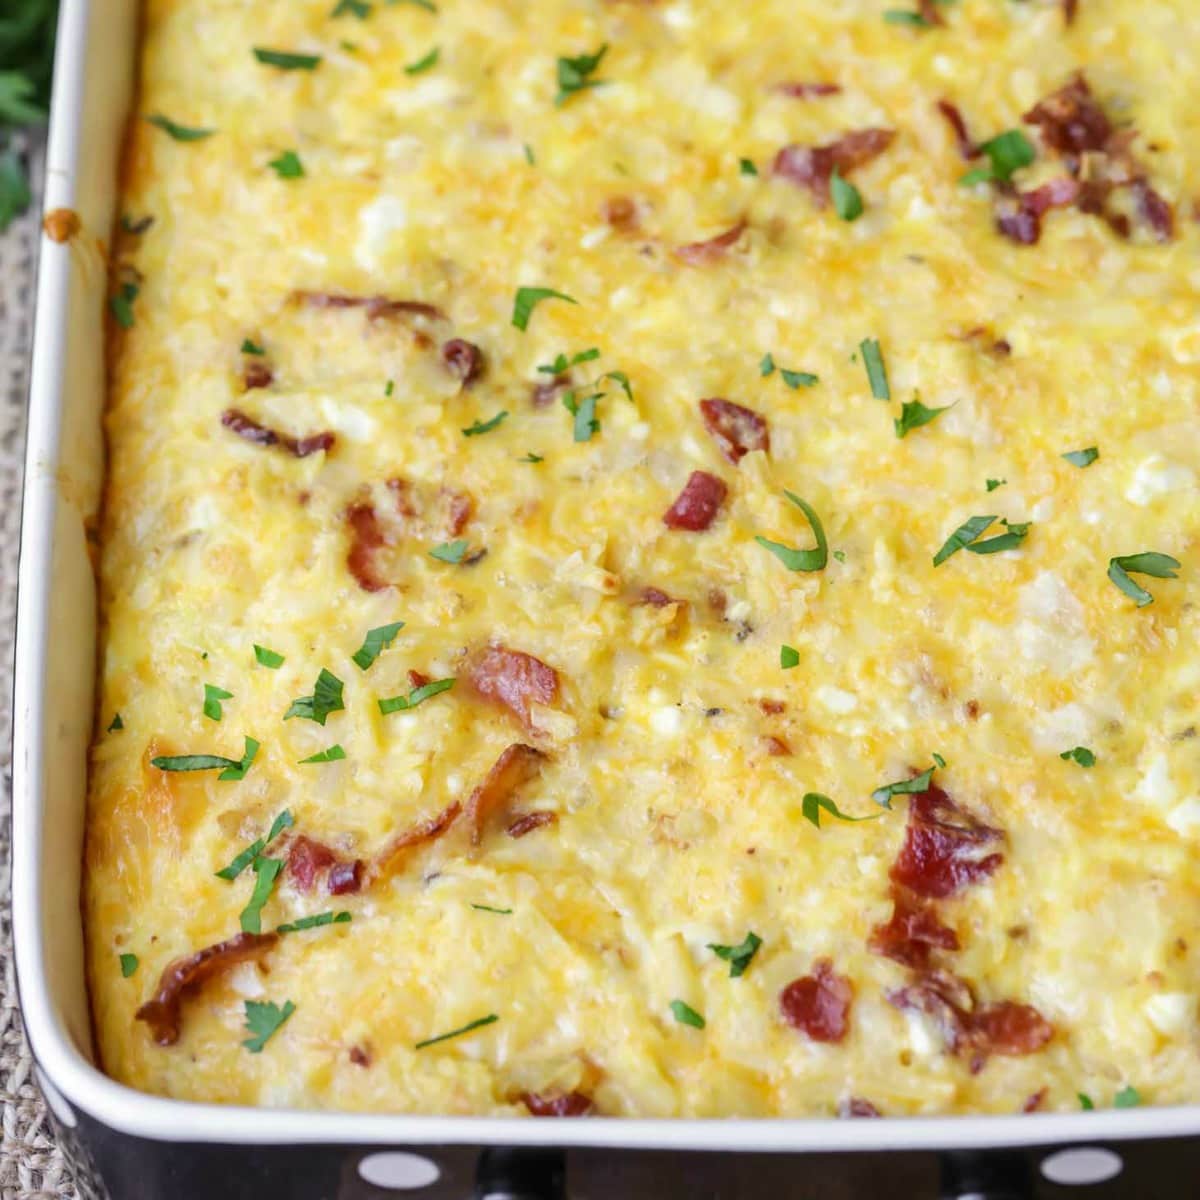 Baked hasbrown breakfast casserole topped with bacon bits.